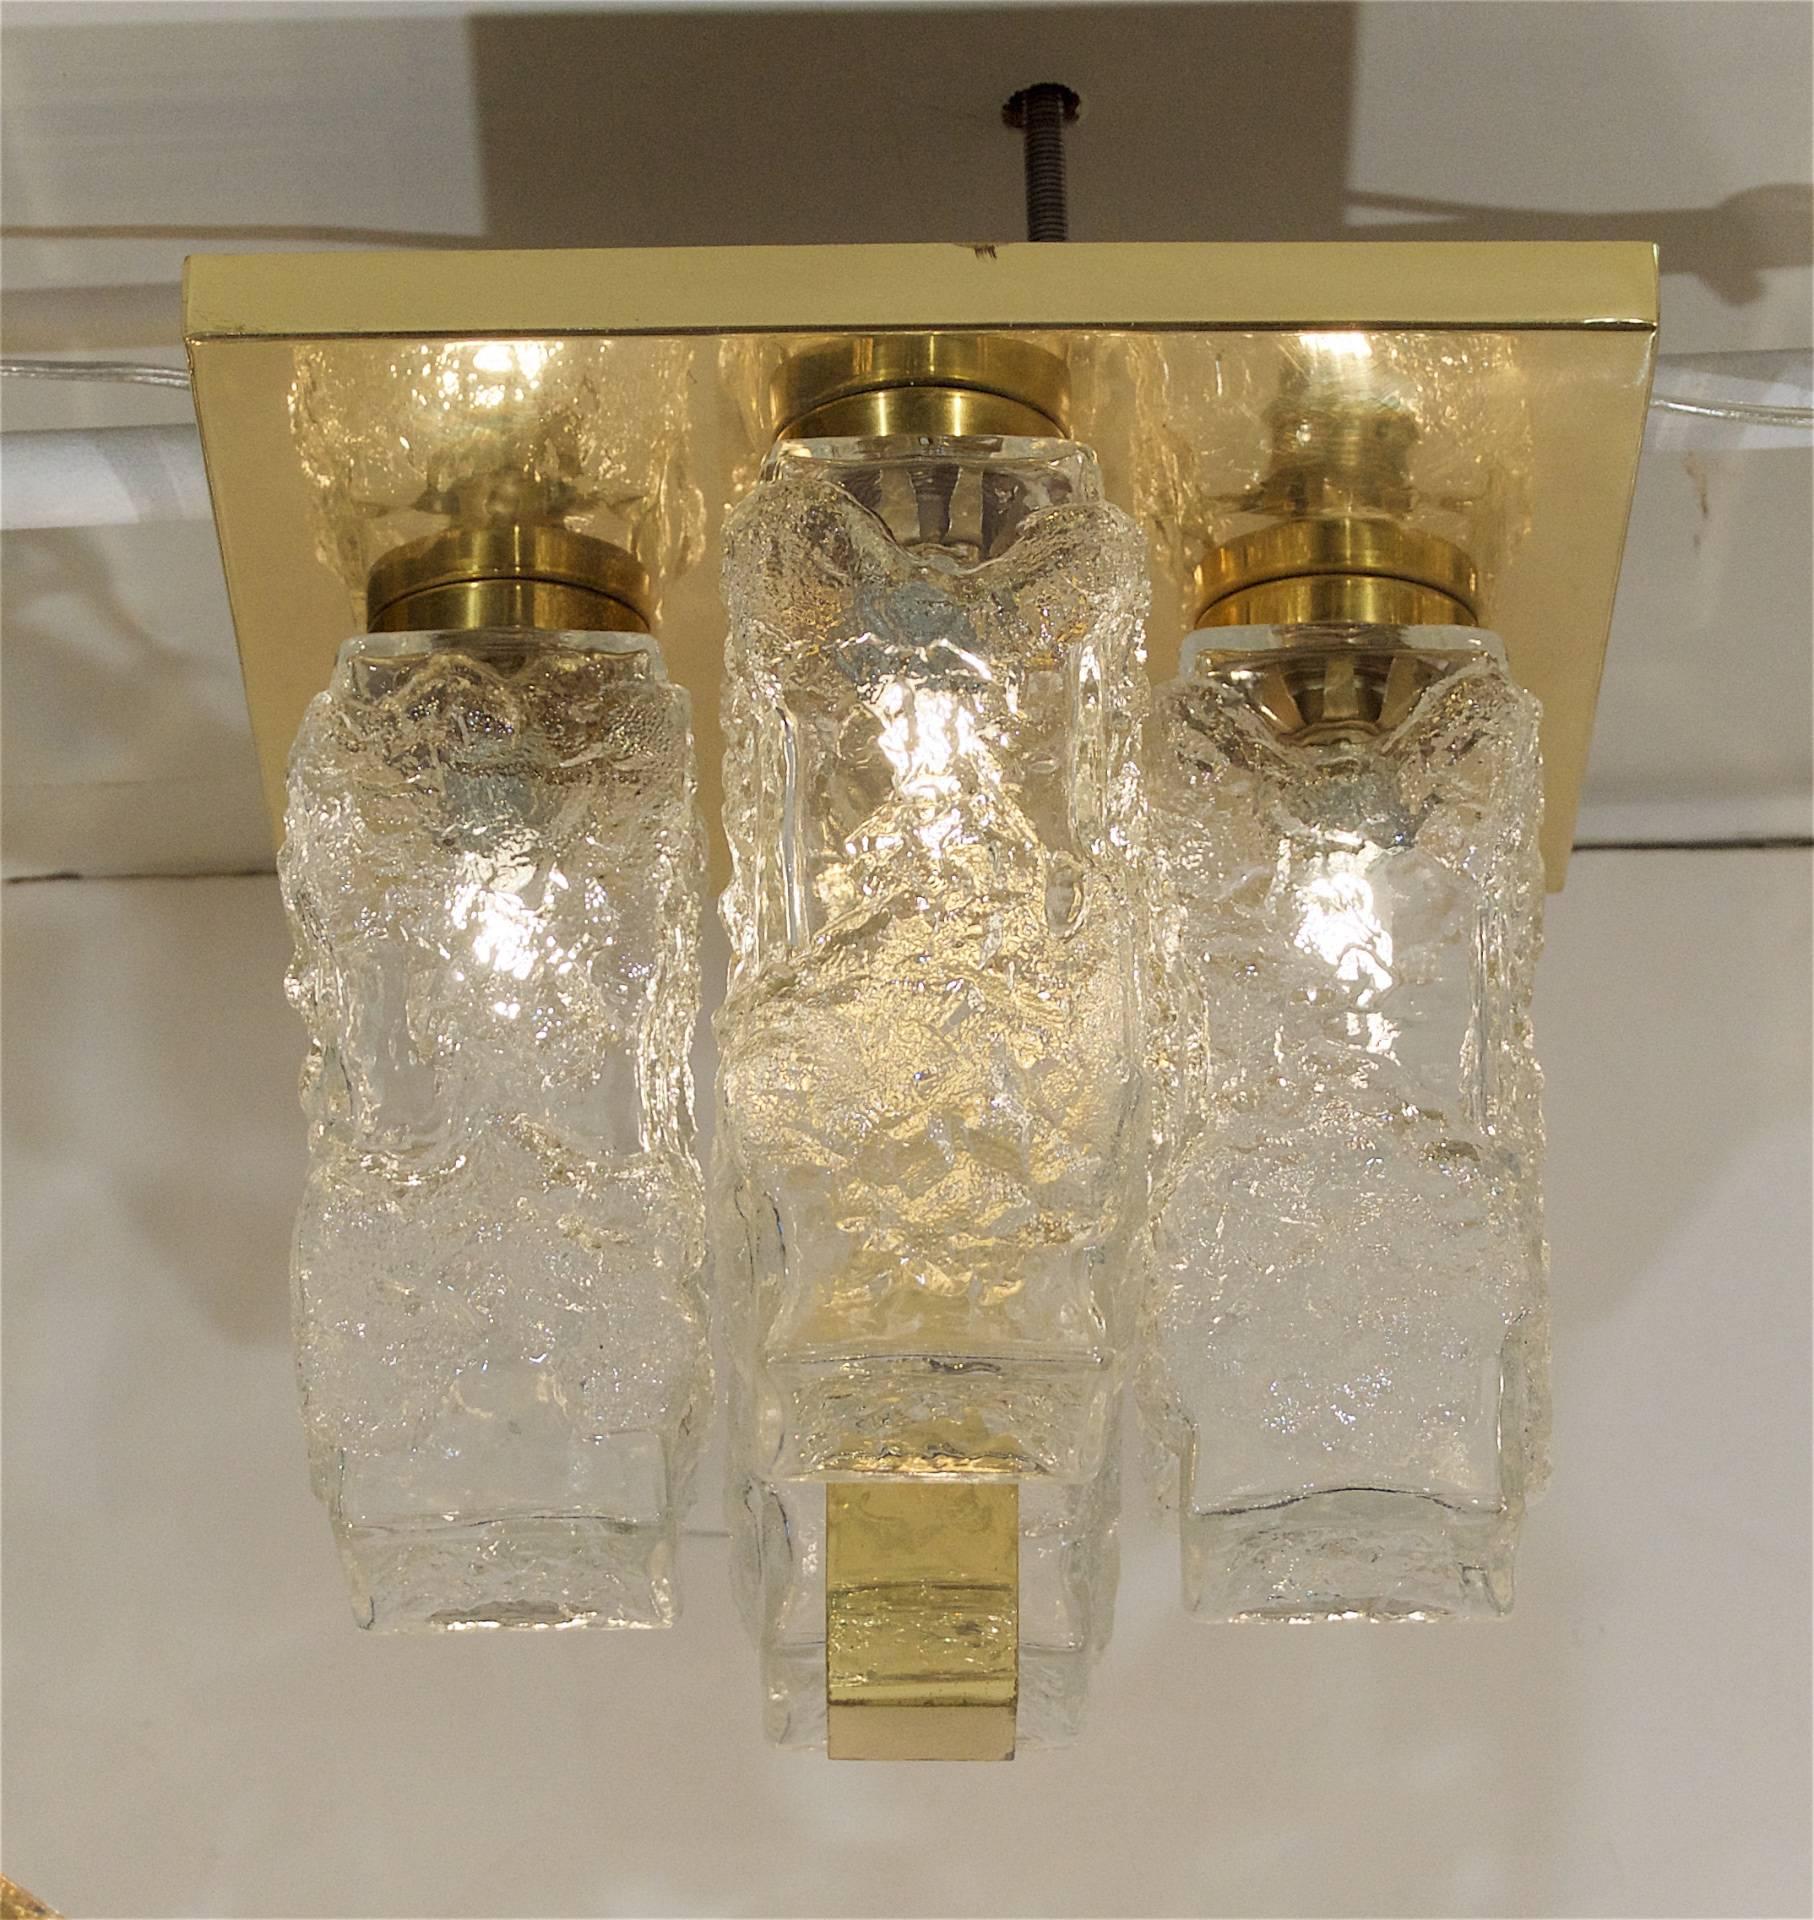 Excellent and dramatic flush mounts by Hillebrand, the brass backplate with central pillar anchoring four ice block glass covers.

Takes 4 E-14 base bulbs up to 40 watts per bulb, new wiring.

Price listed is per flush mount. (5 available).